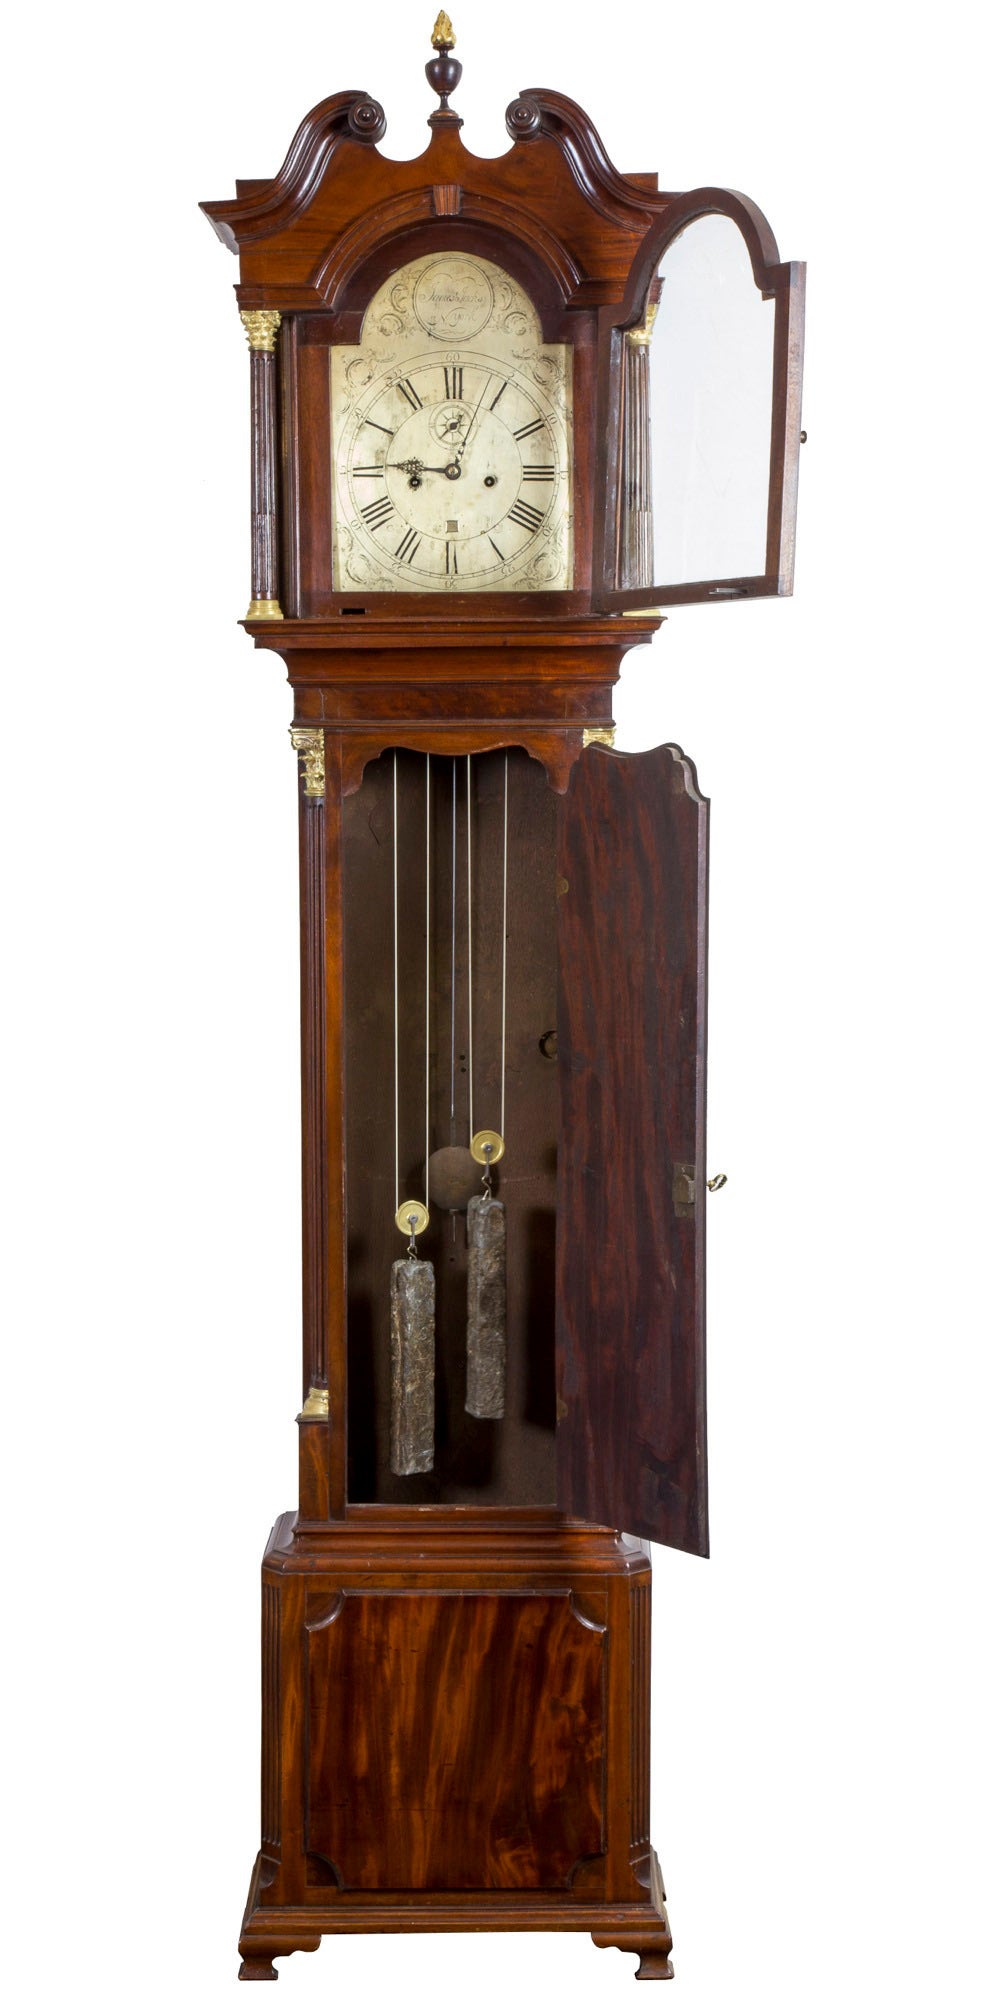 This tall clock is composed of solid, dense ribbon grain mahogany, circa 1780. The panel door and base panel are truly dramatic and bring a vitality to this clock which is supported visually by fluted corner moldings with capitals that are the